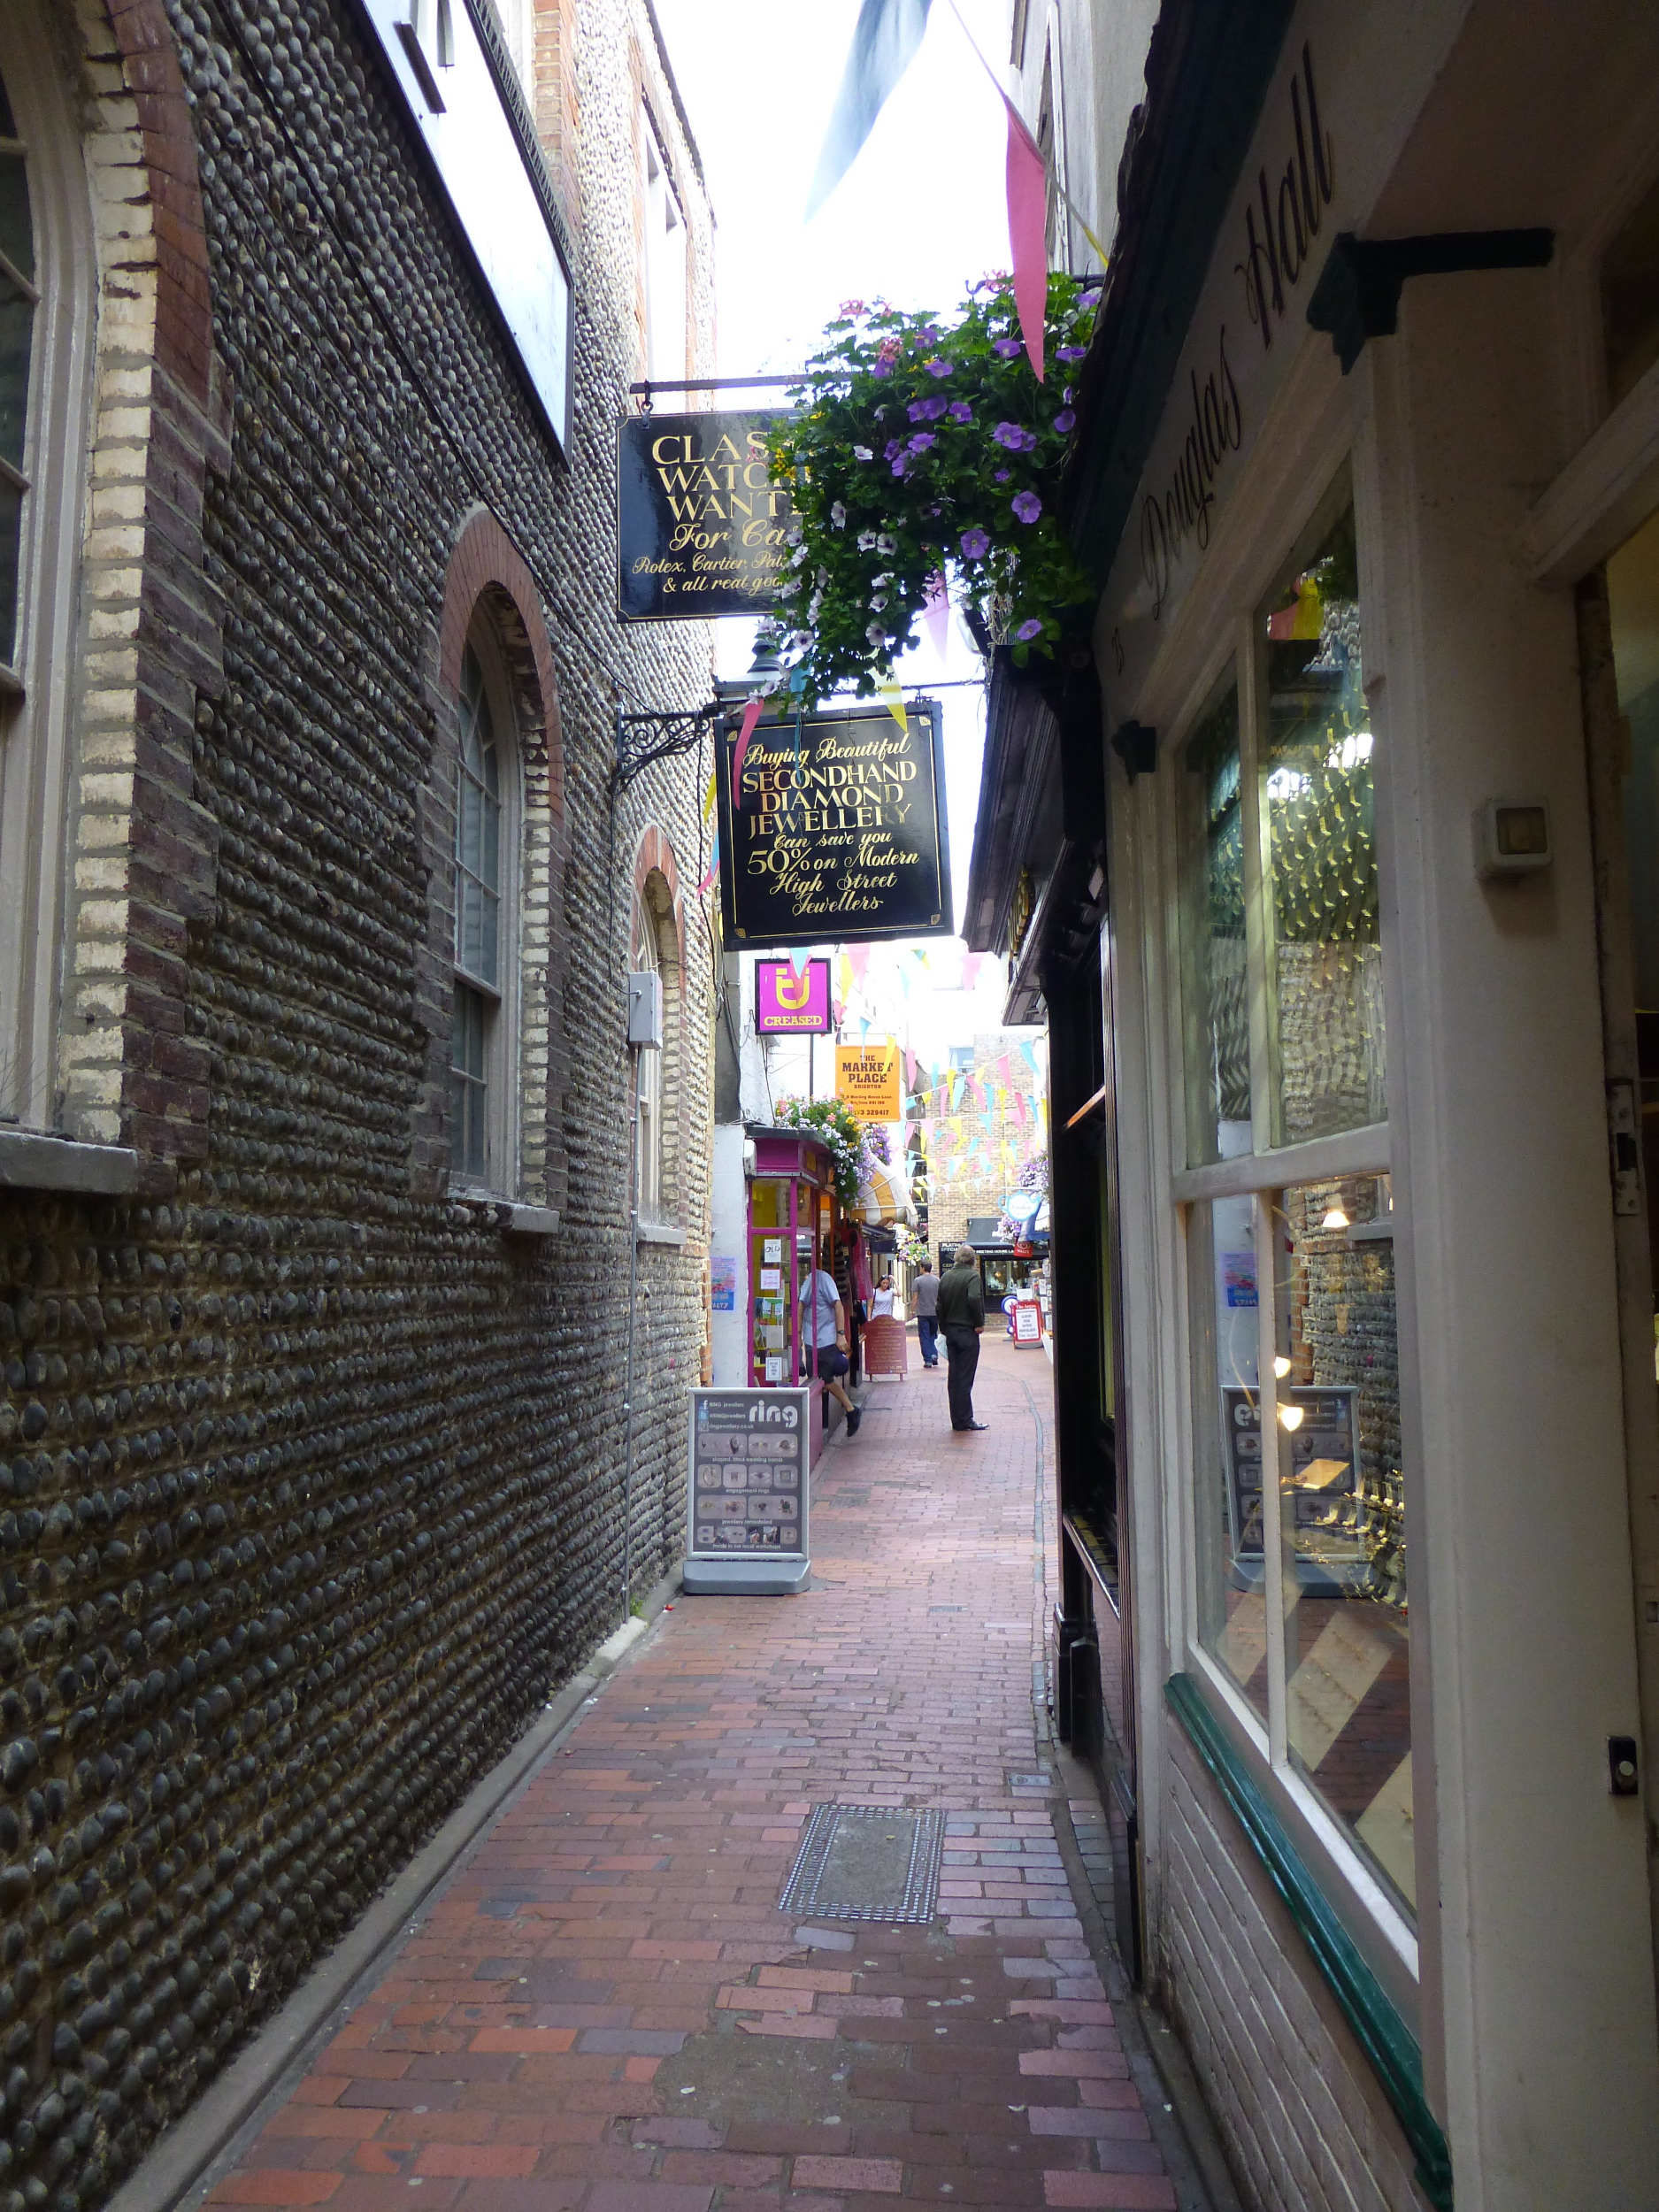 Small street in the lanes